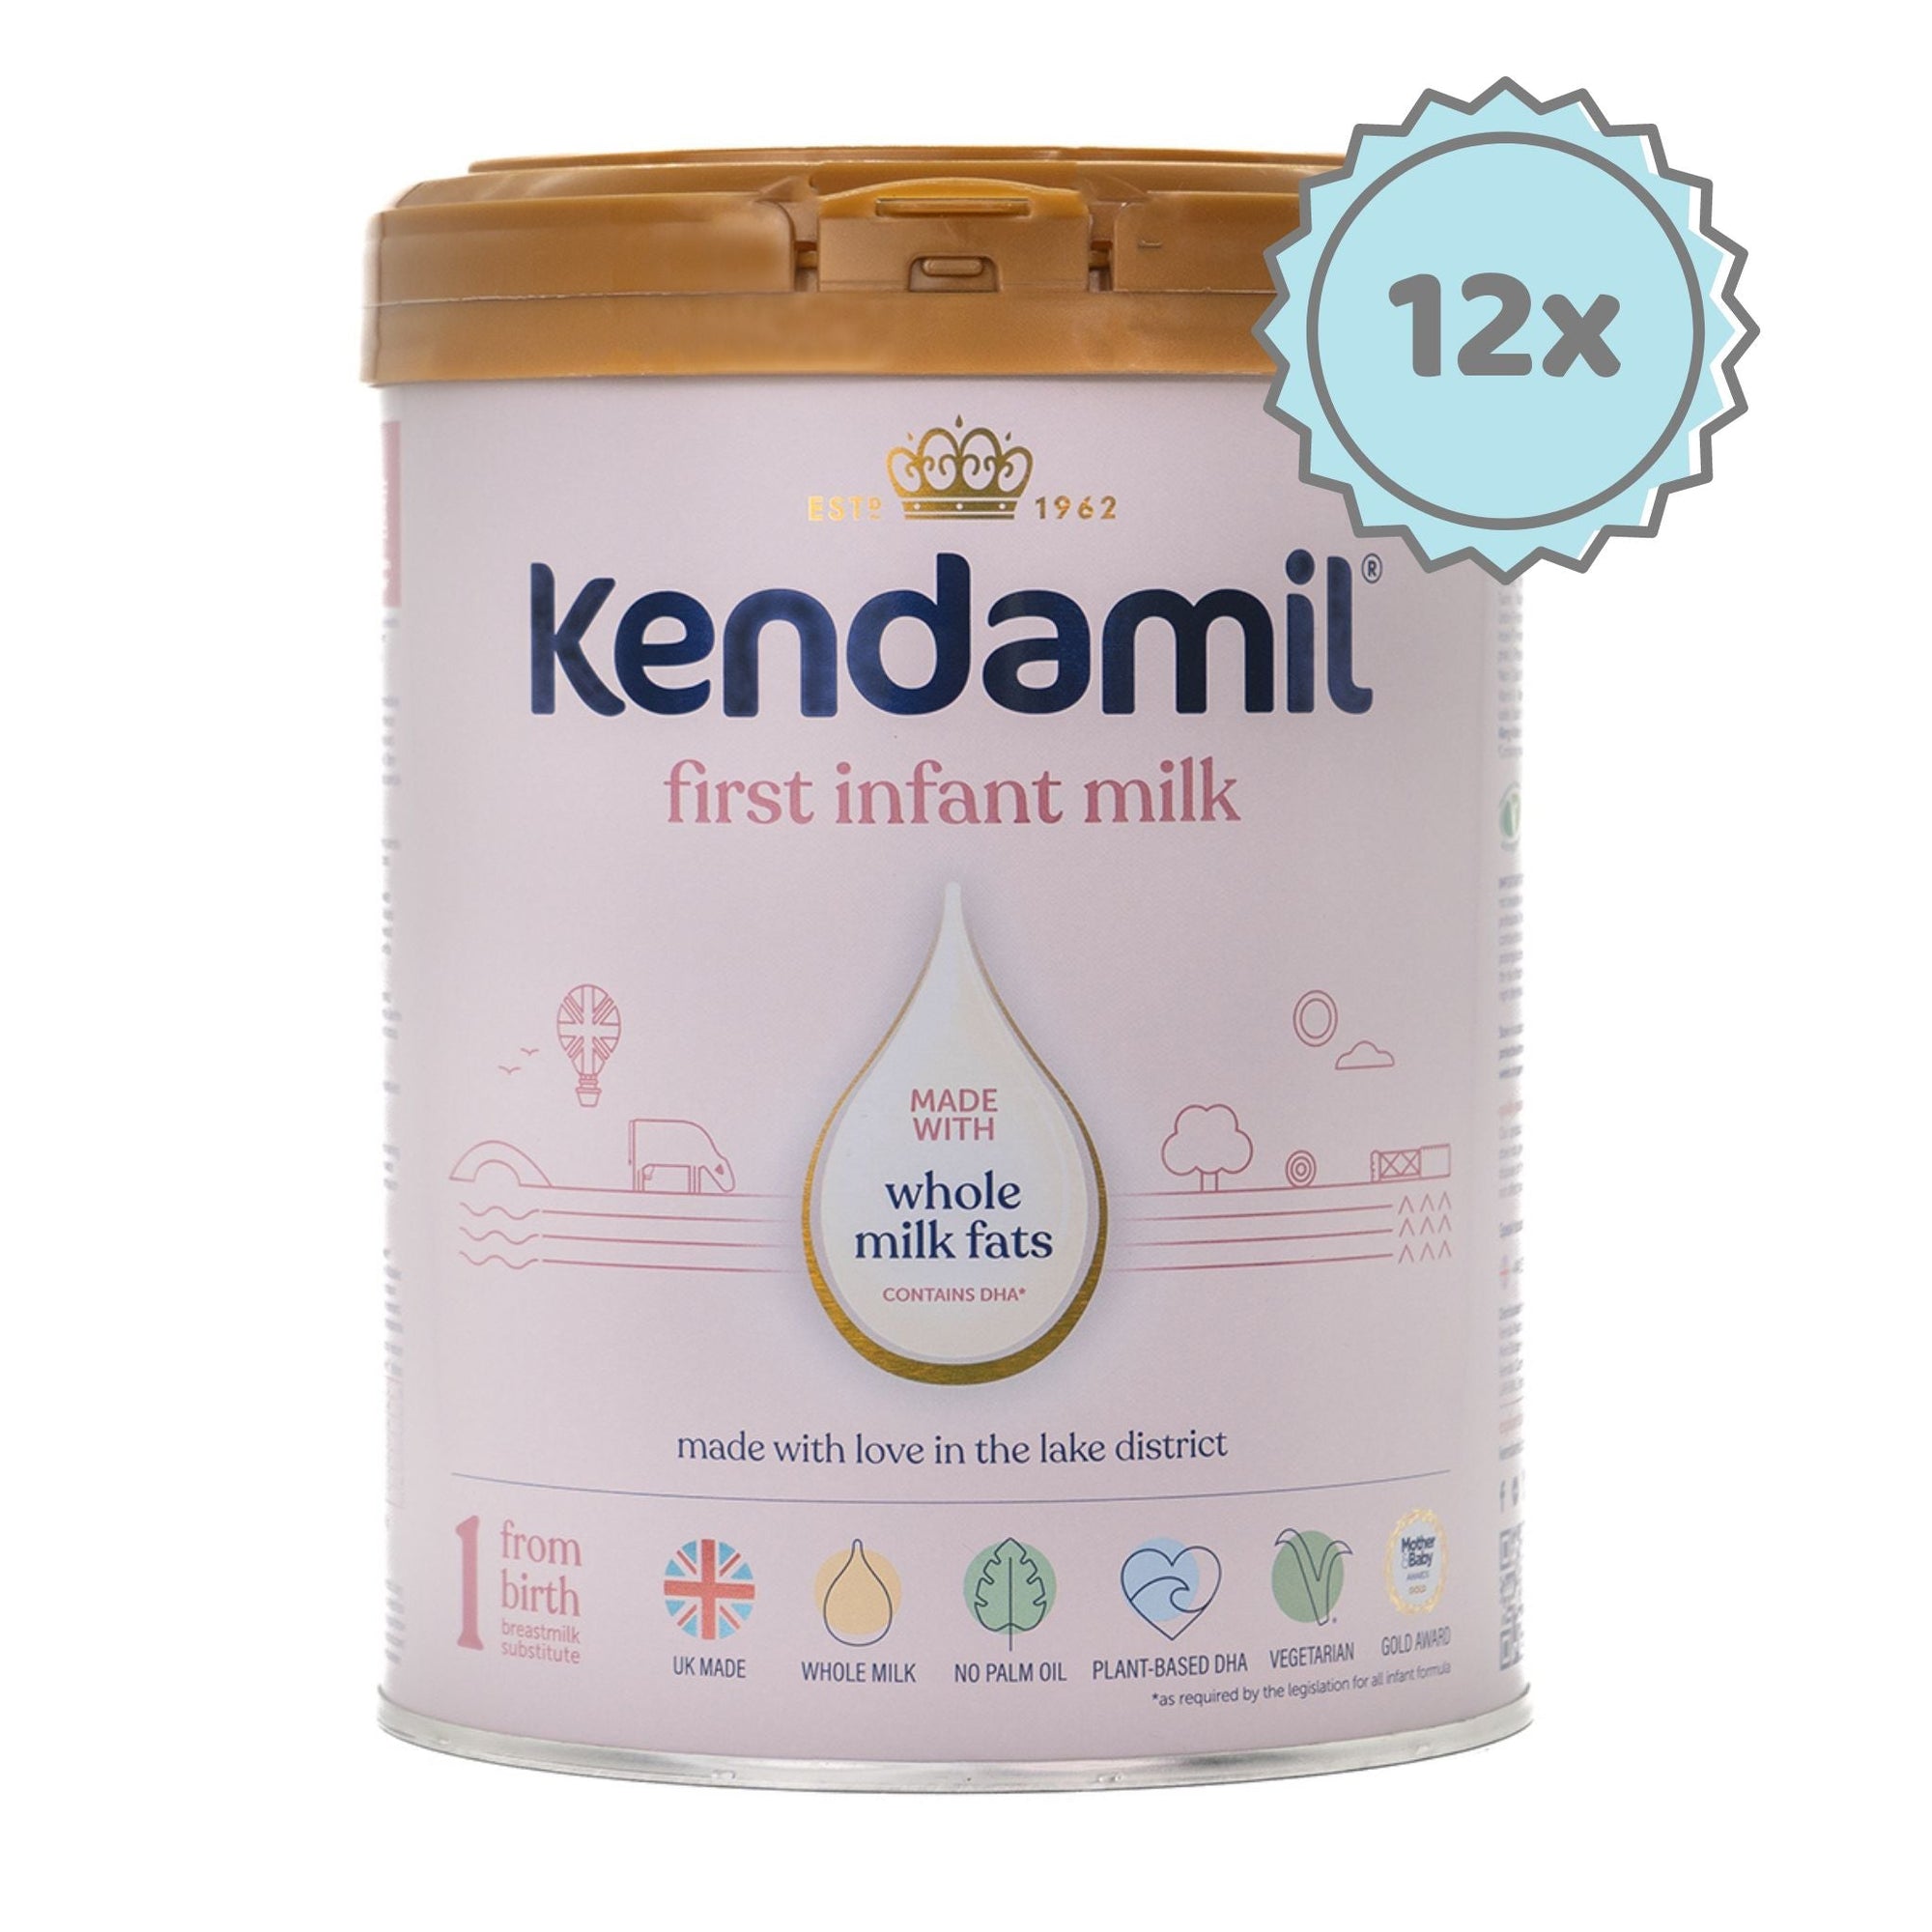 Kendamil Classic First Infant Milk Formula Stage 1 | Organic European Baby Formula | 12 cans